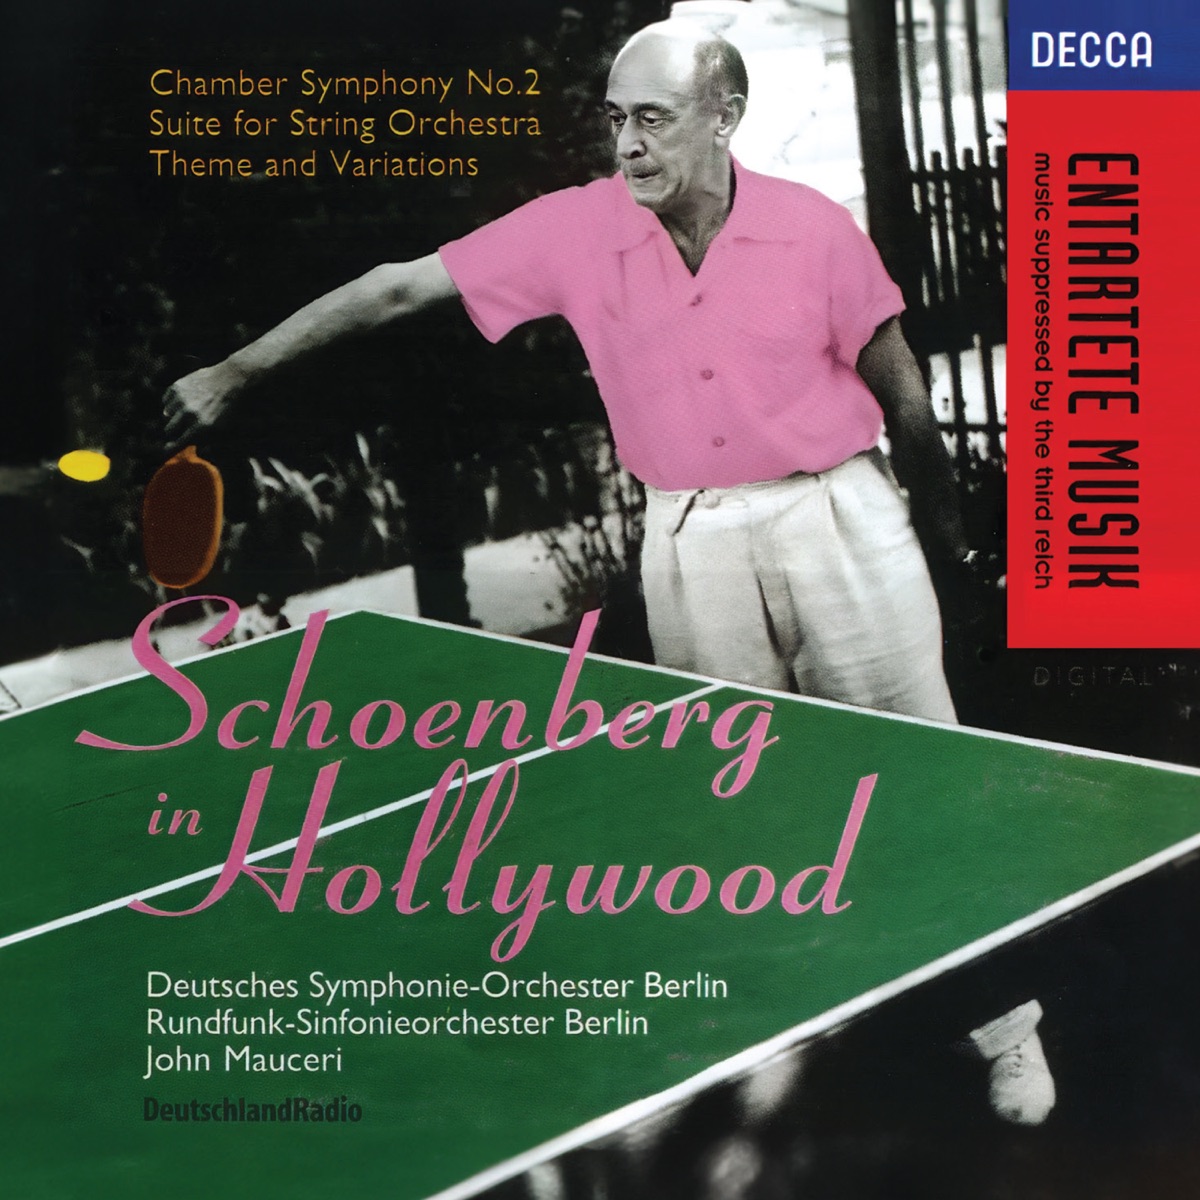 Schoenberg in Hollywood Mauceri